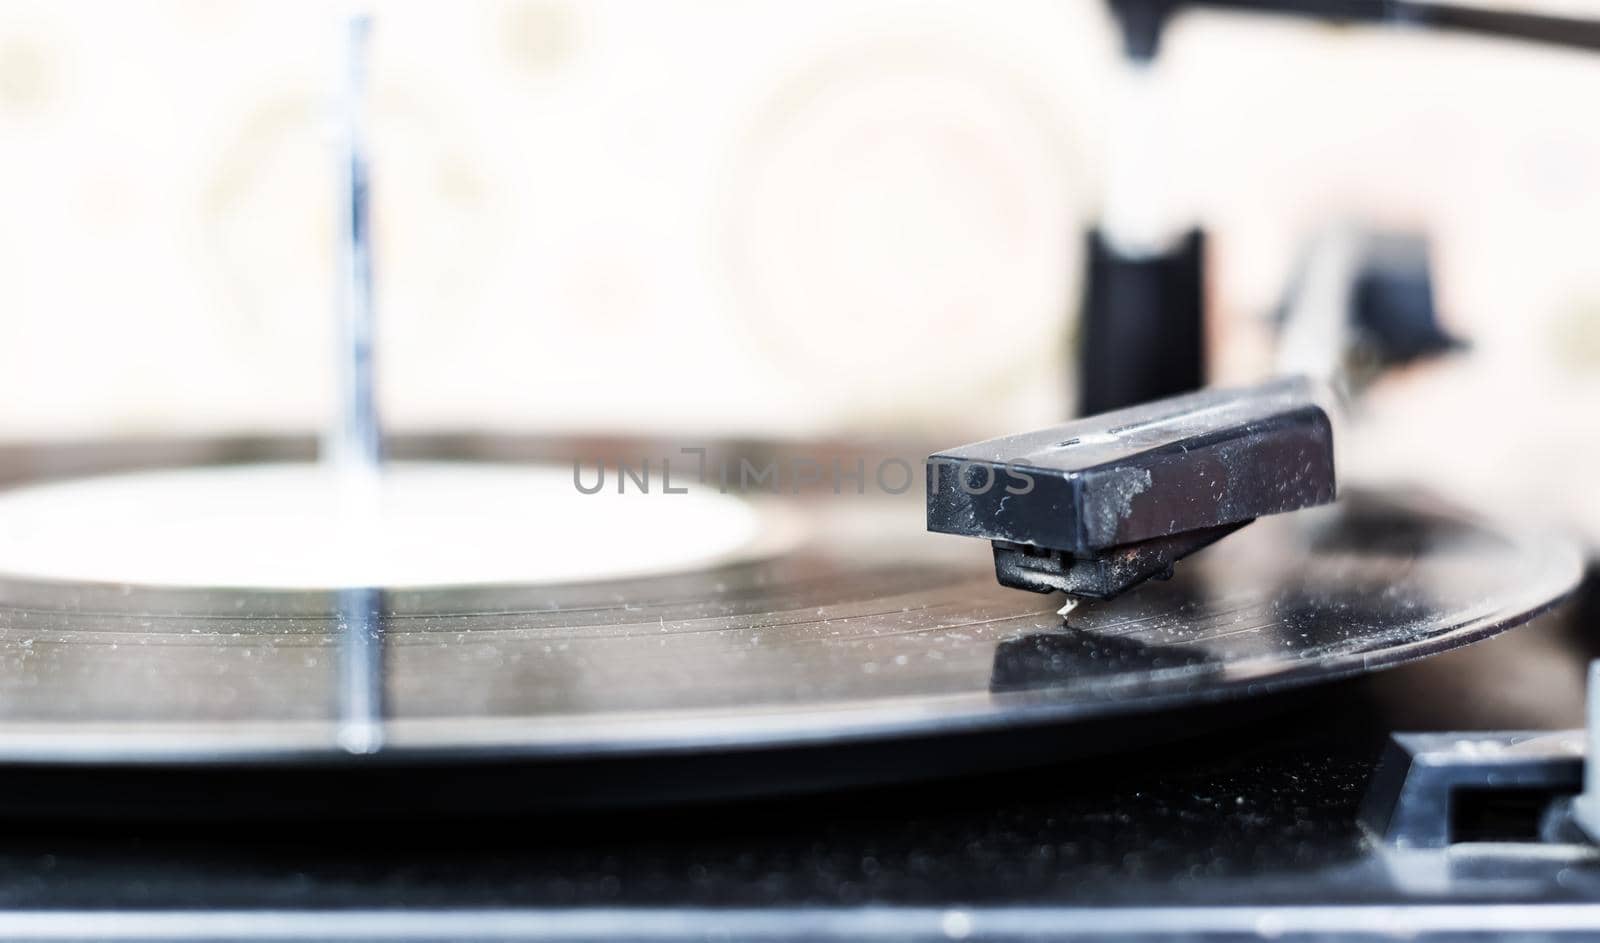 the needle of a turntable playing the tracks of a black vinyl record. Vintage audio equipment. Vinyl record player